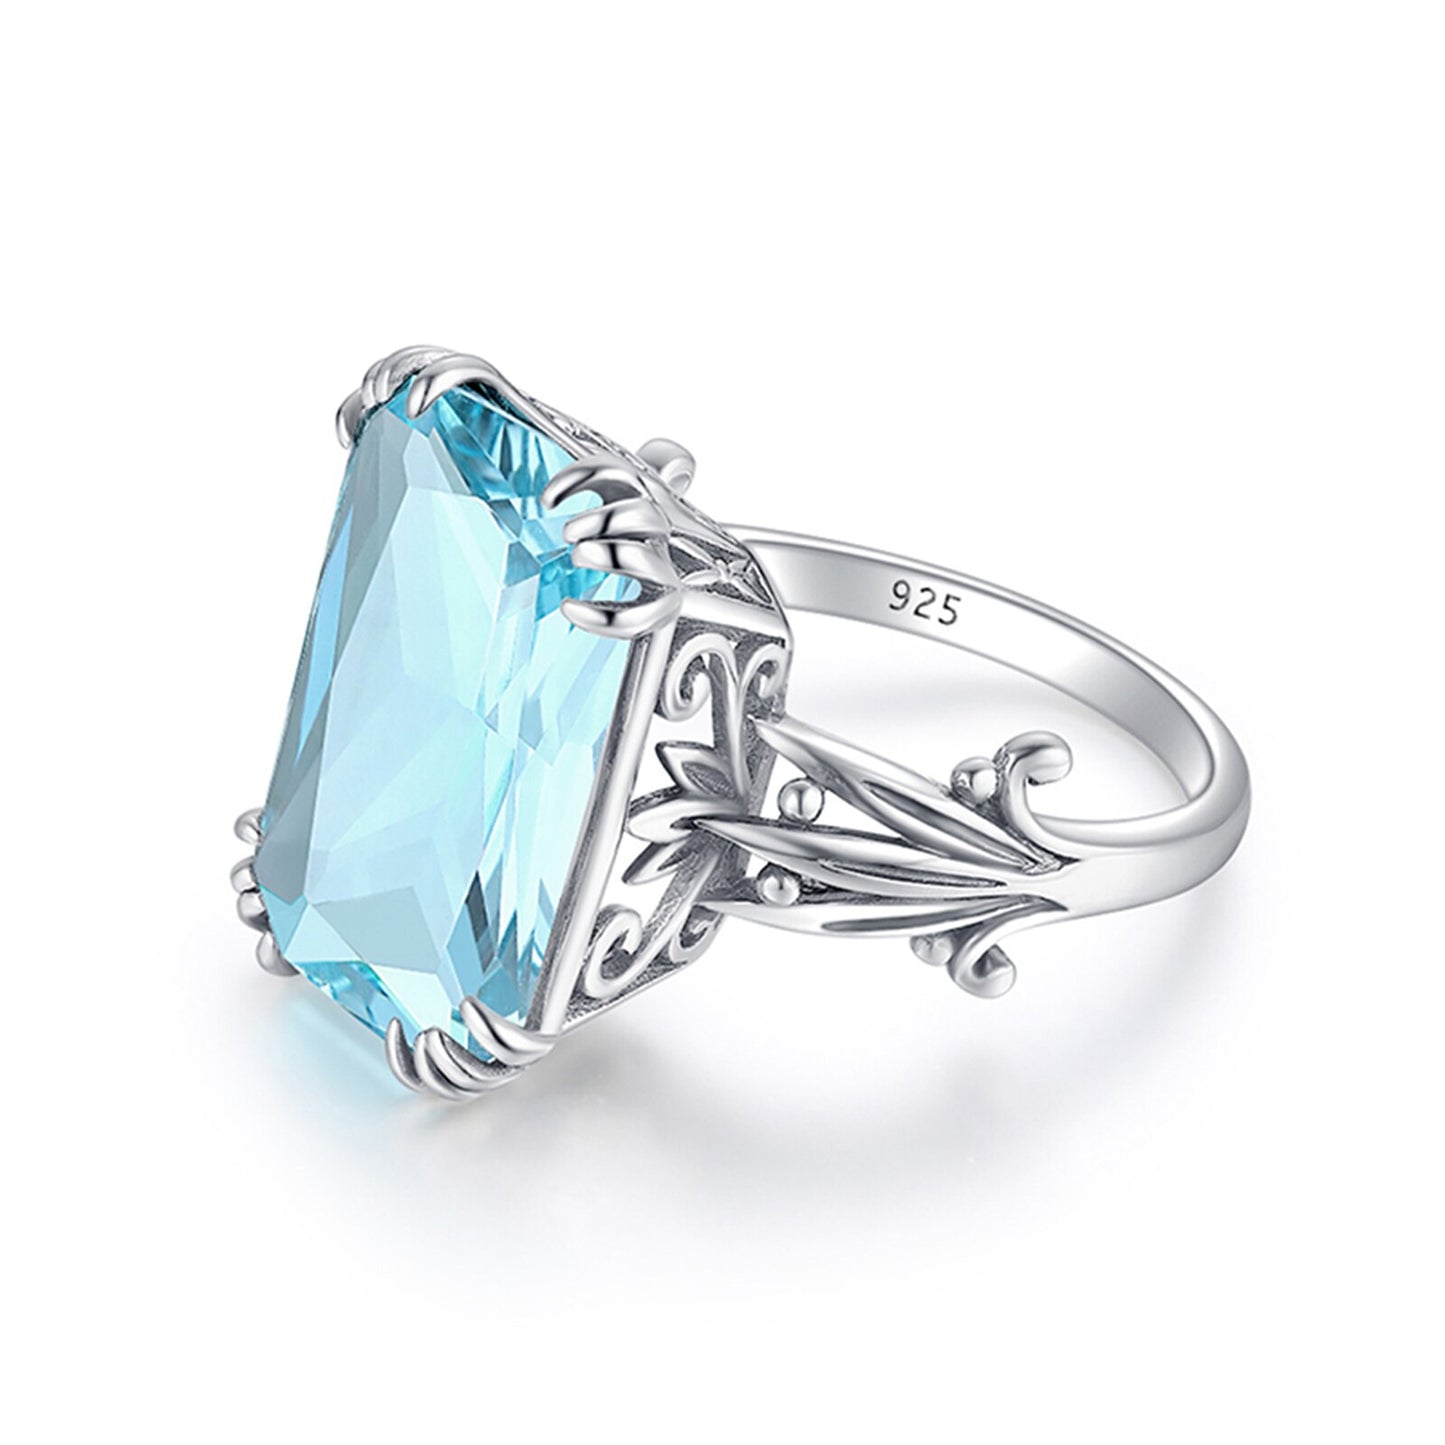 Szjinao Real 925 Sterling Silver Aquamarine Rings For Women Sky Blue Topaz Ring With Stone Massive Silver 925 Jewellery Gift JH